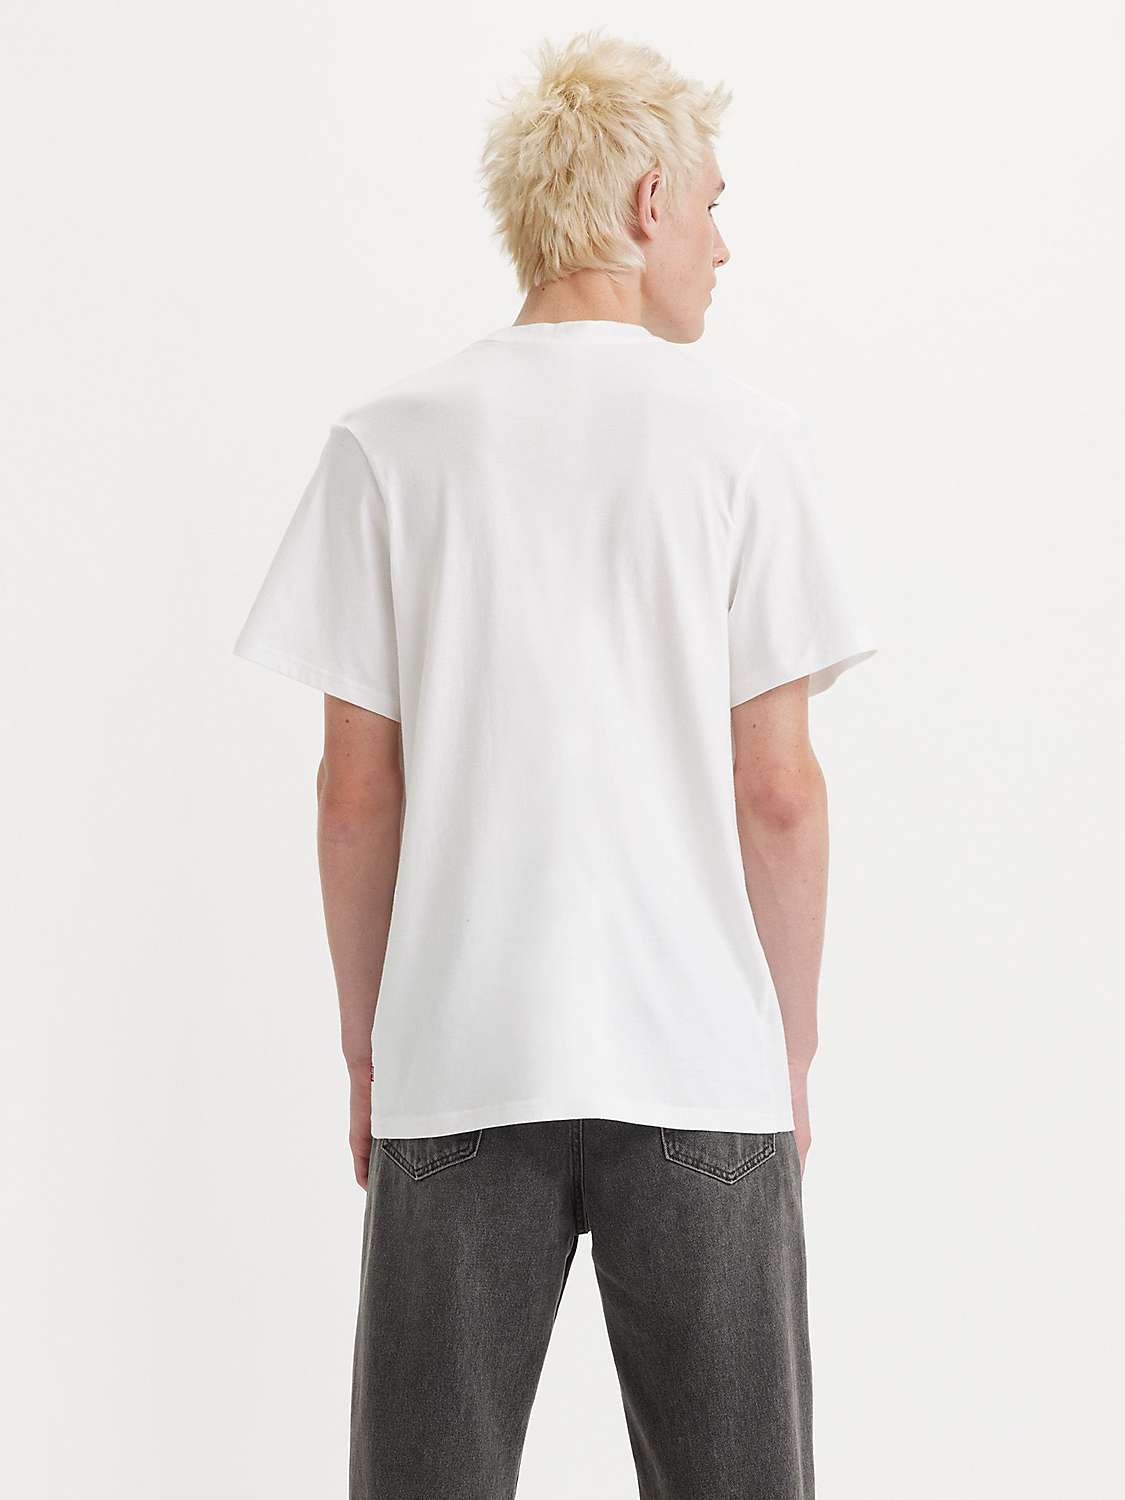 Buy Levi's Short Sleeve Relaxed Fit T-Shirt, Chrome White Online at johnlewis.com